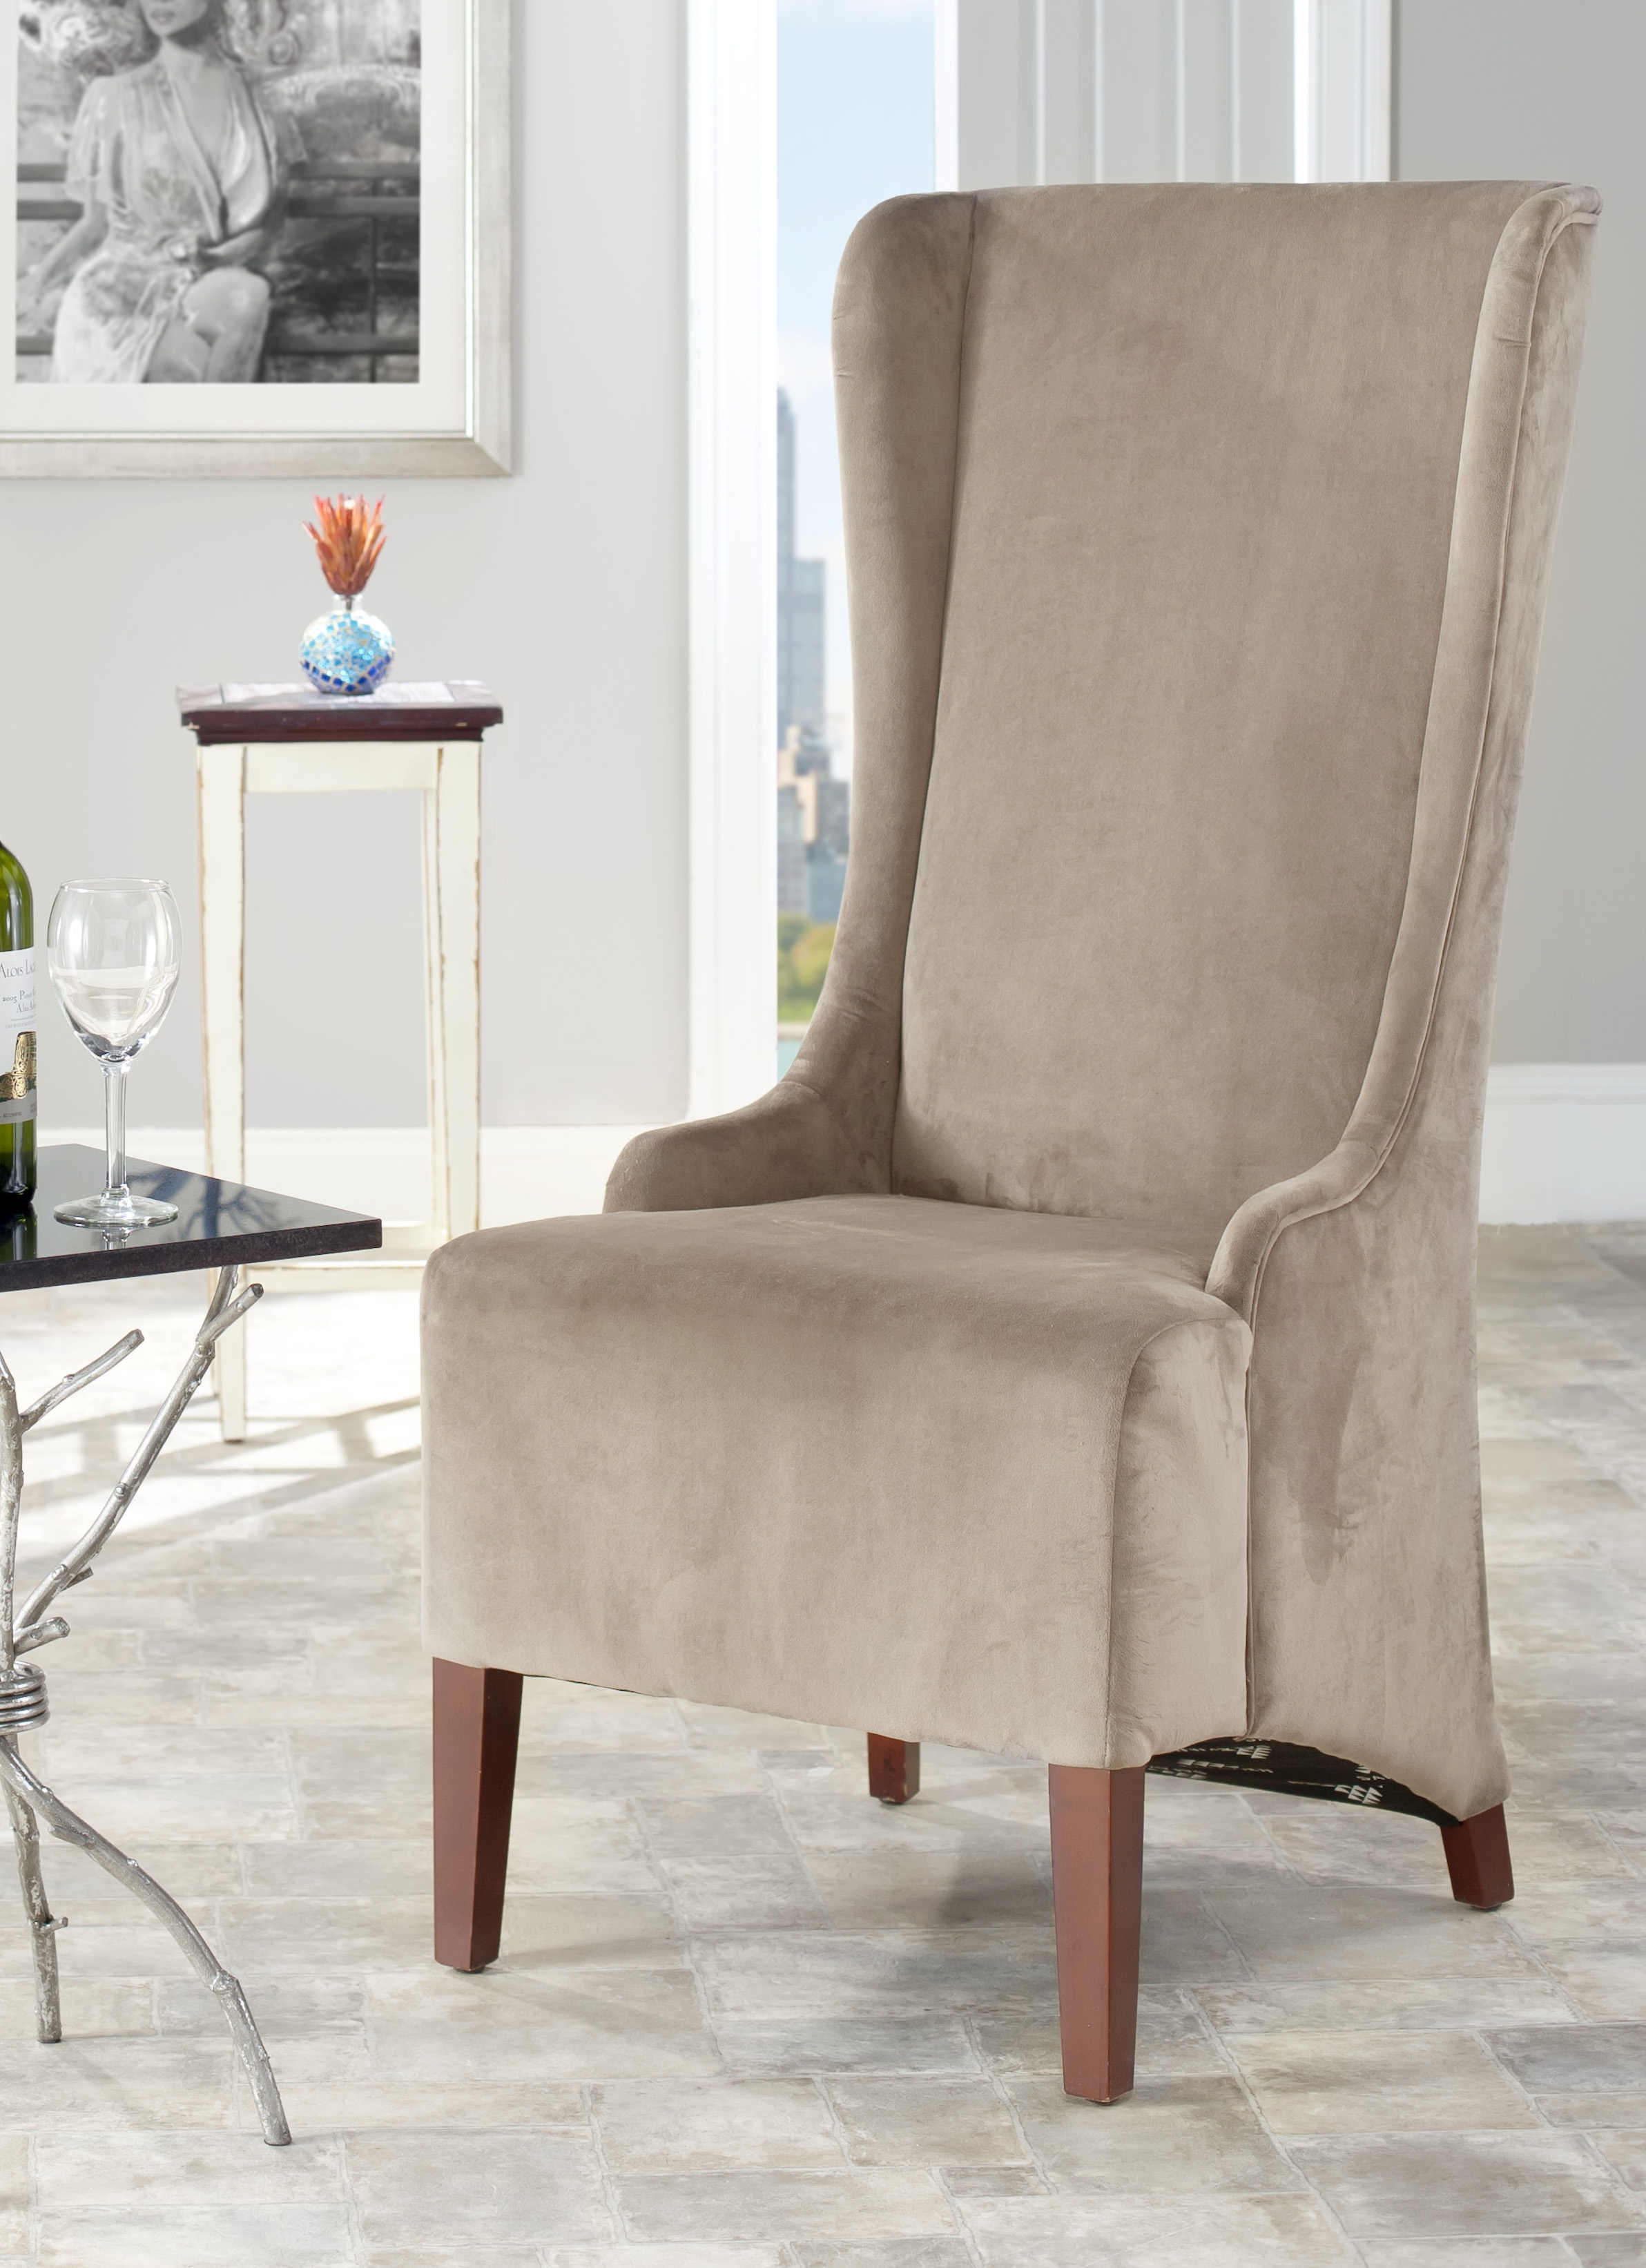 Becall 20''H Cotton Dining Chair - Mushroom Taupe/Cherry Mahogany - Arlo Home - Image 3